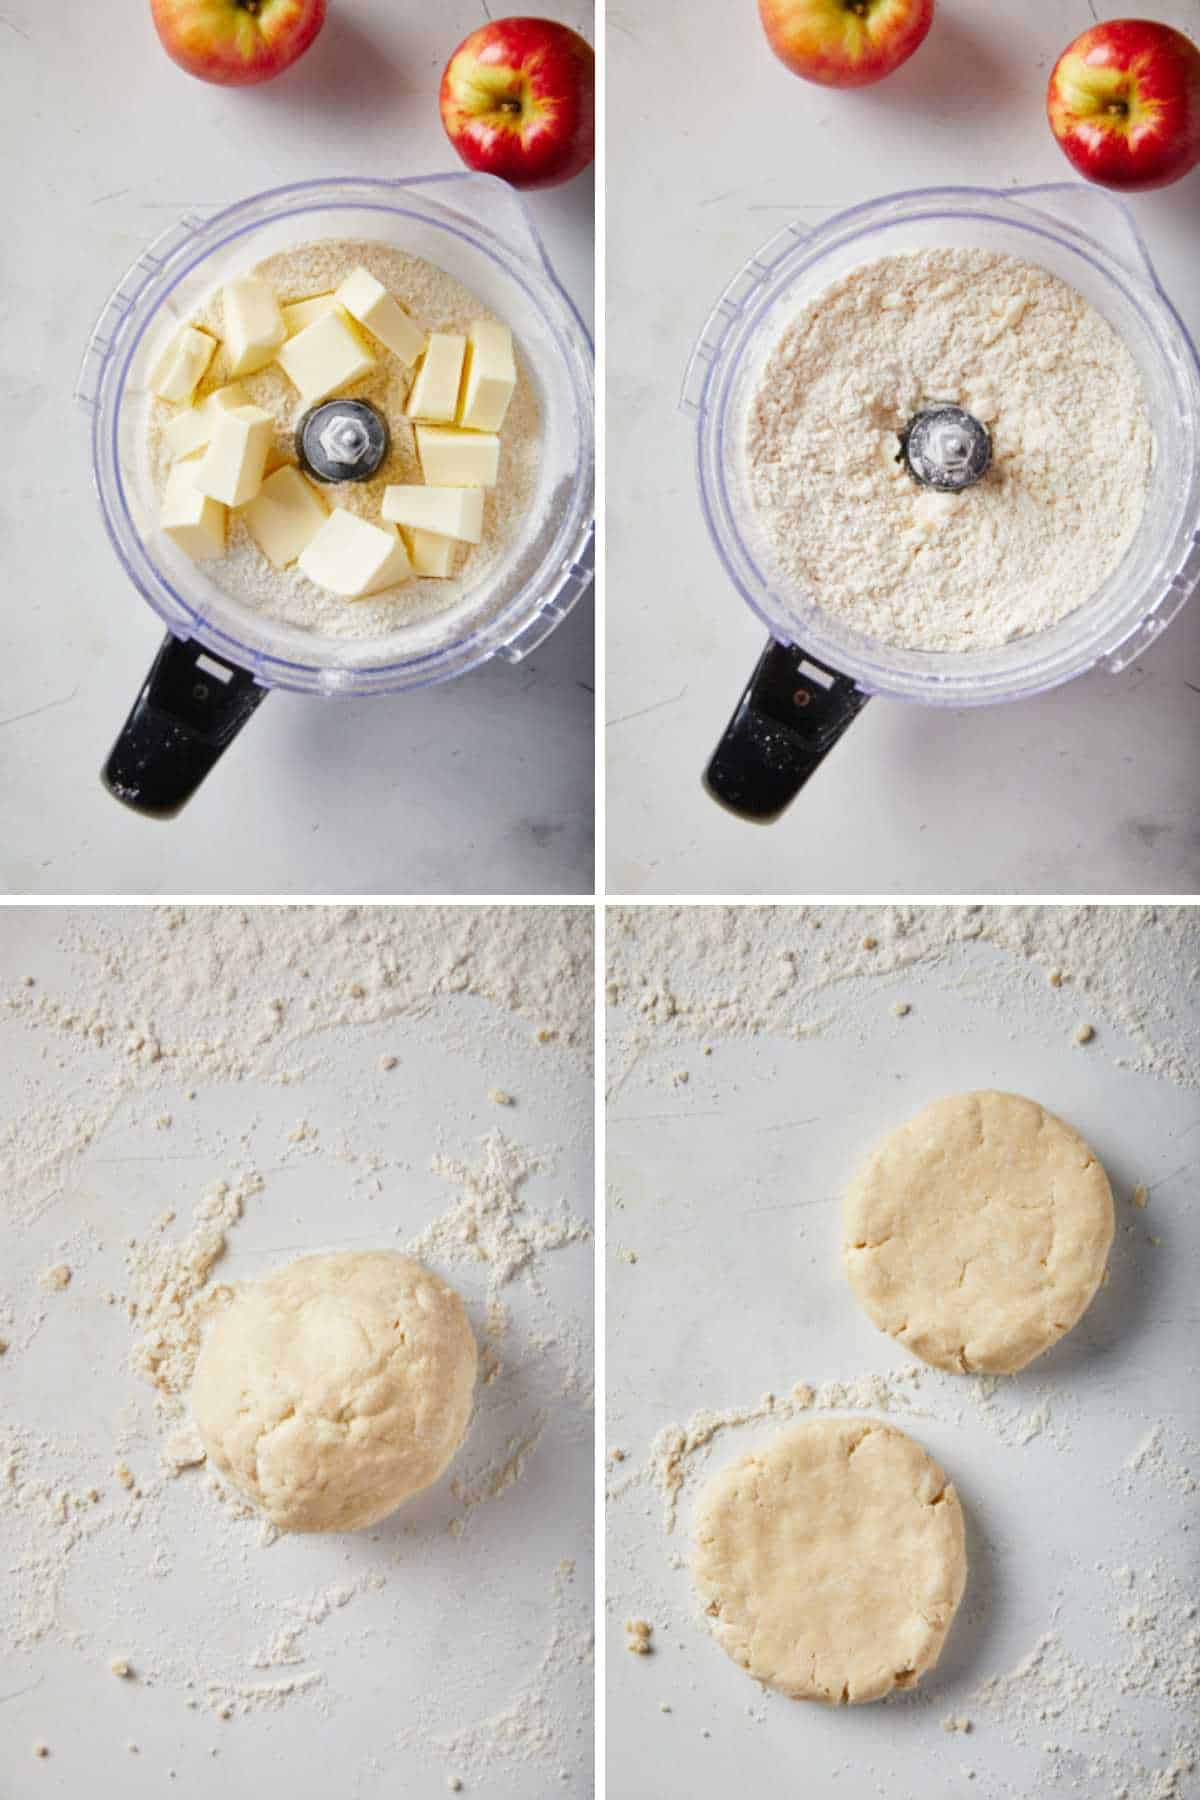 Collage showing ingredients added to food processor, then the dough ball on the counter, and split into two pieces.